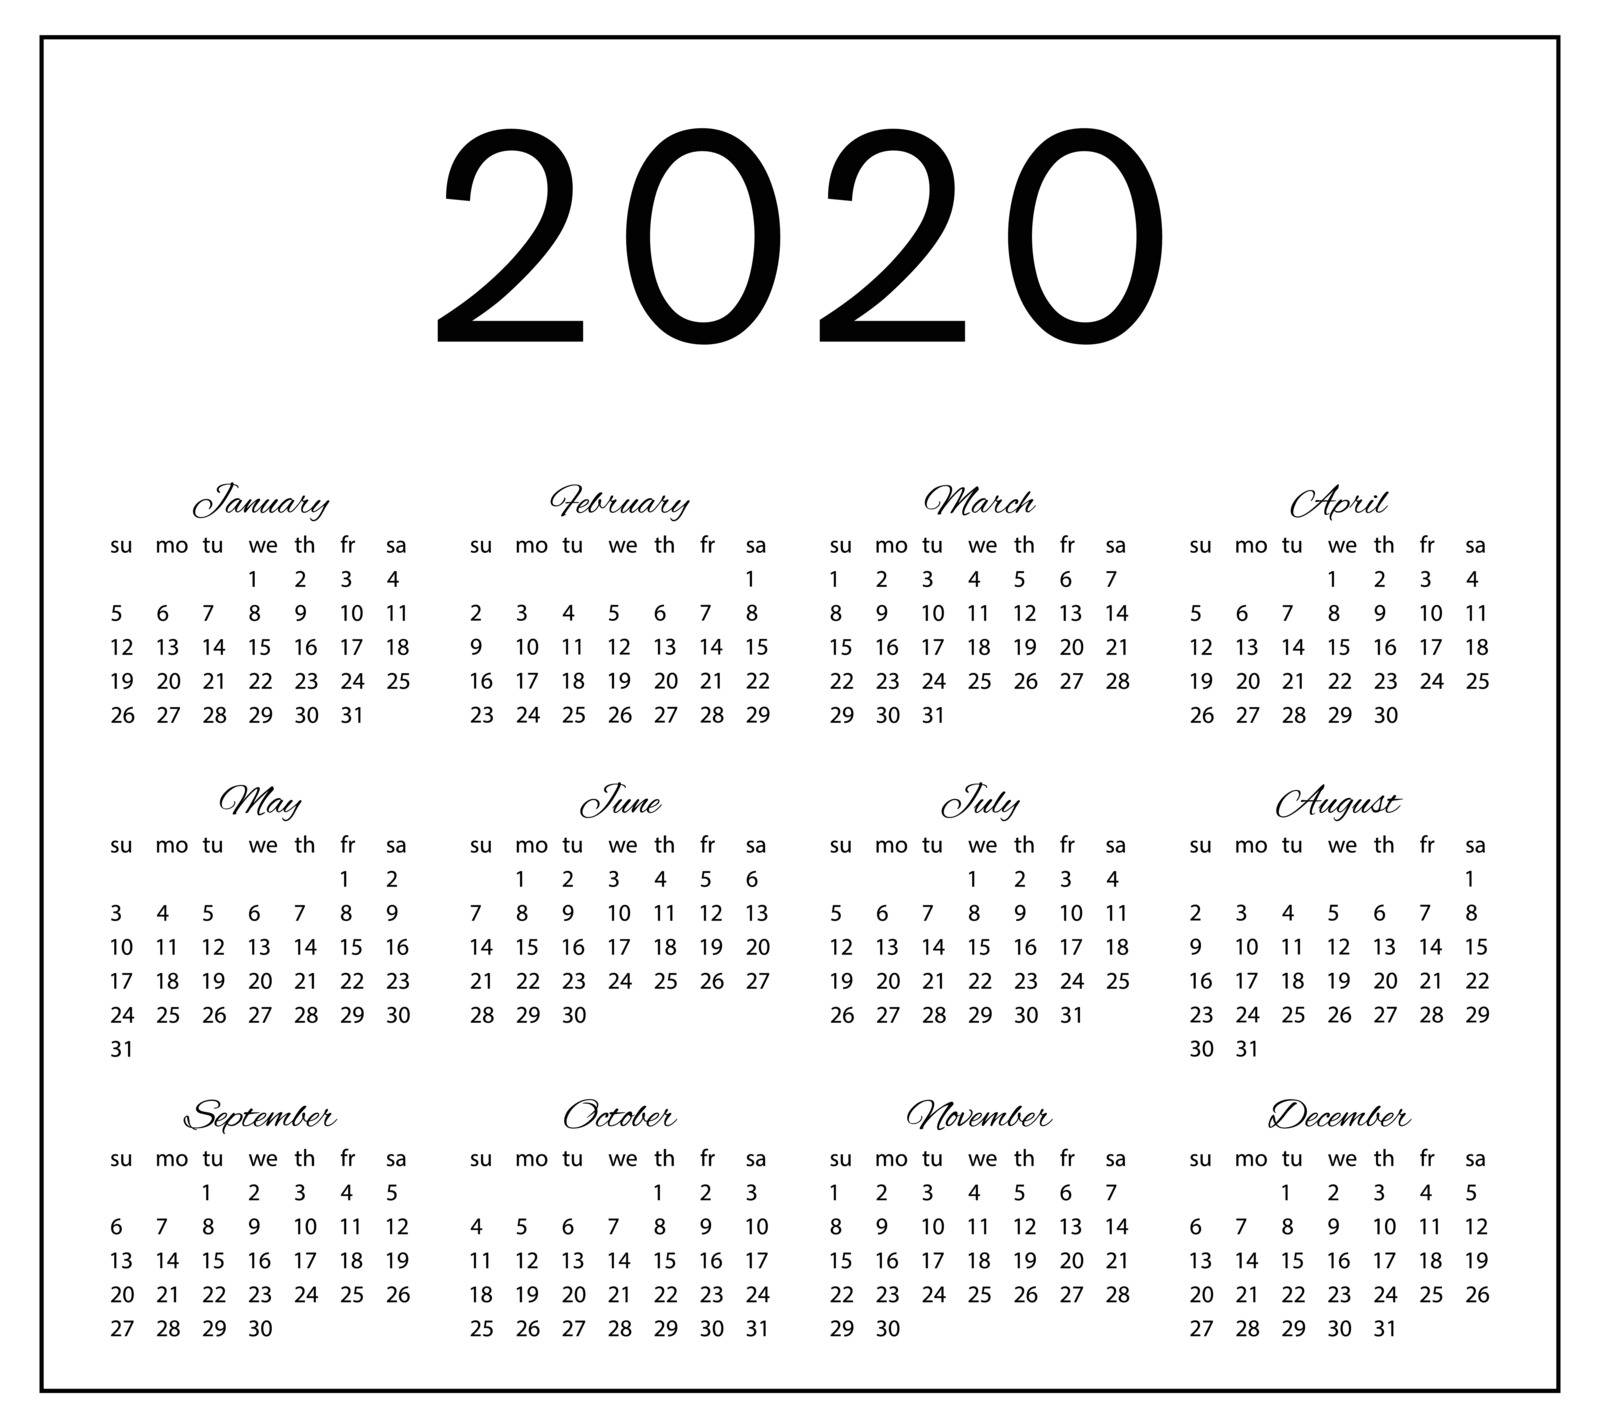 2020 simple Calendar, sunday to monday. Black text and numbers on white background, with dark frame. Months in handwritten lettering.